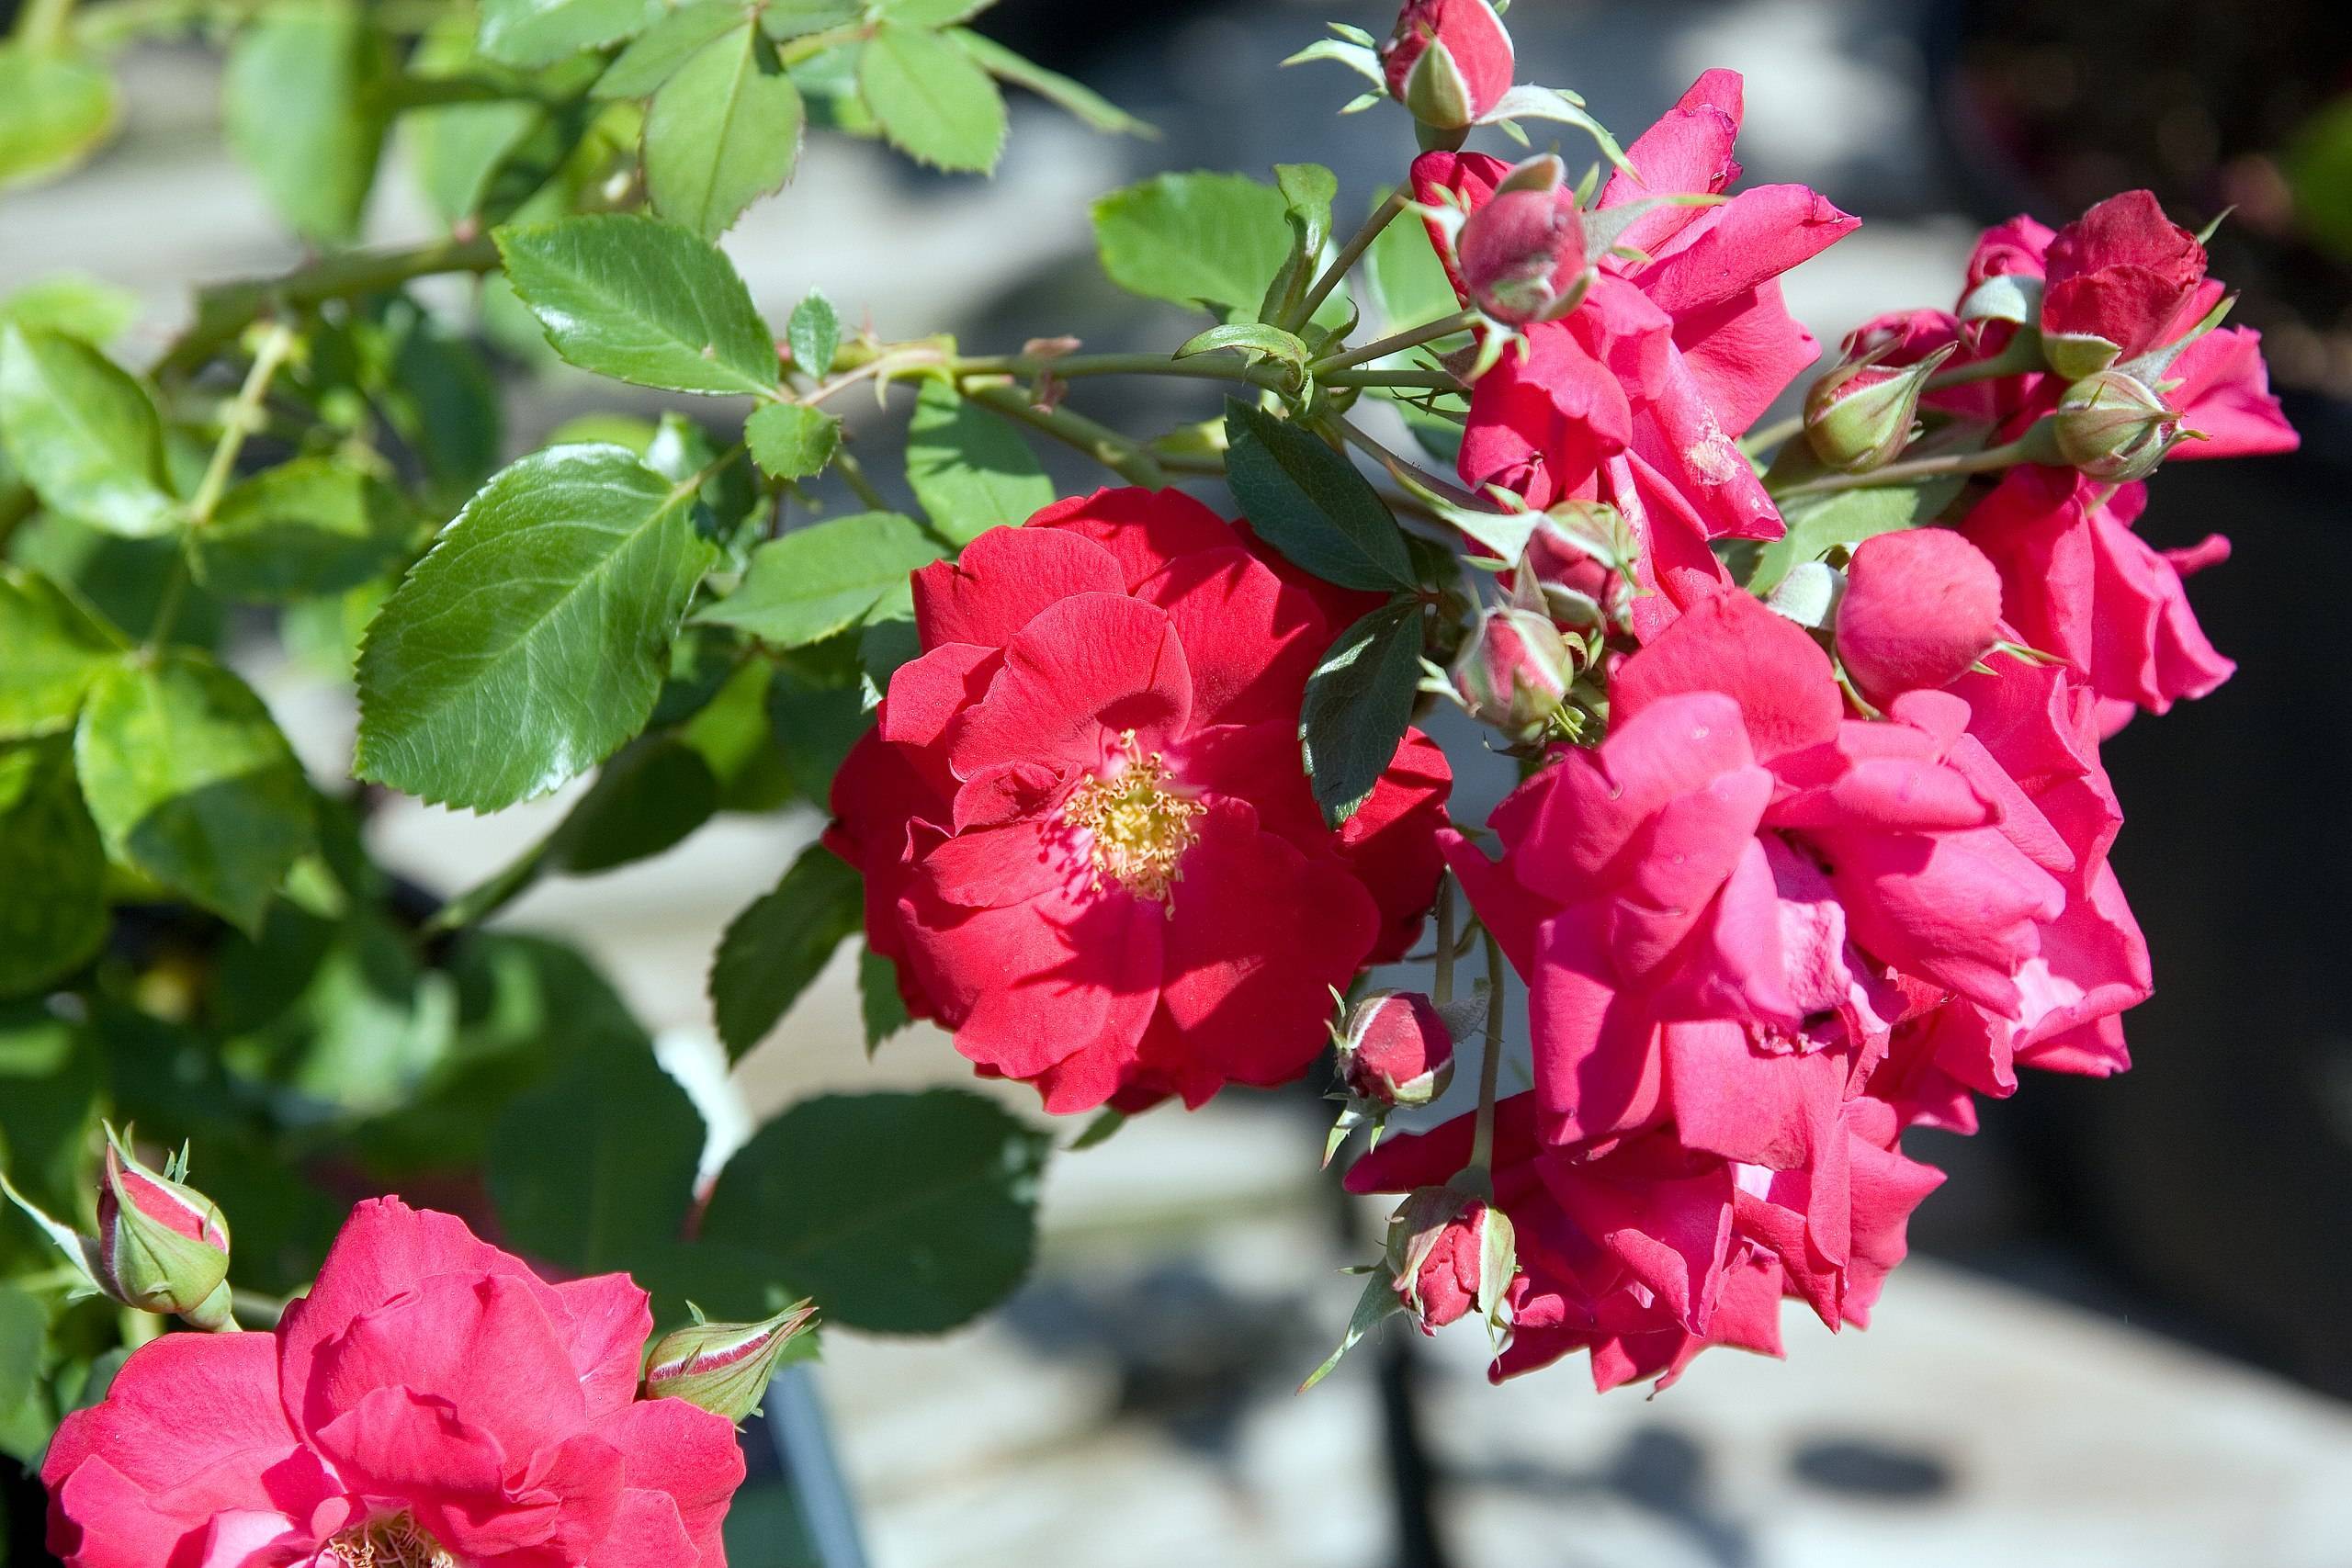 pink-red flowers with yellow center and lime-green leaves and stems